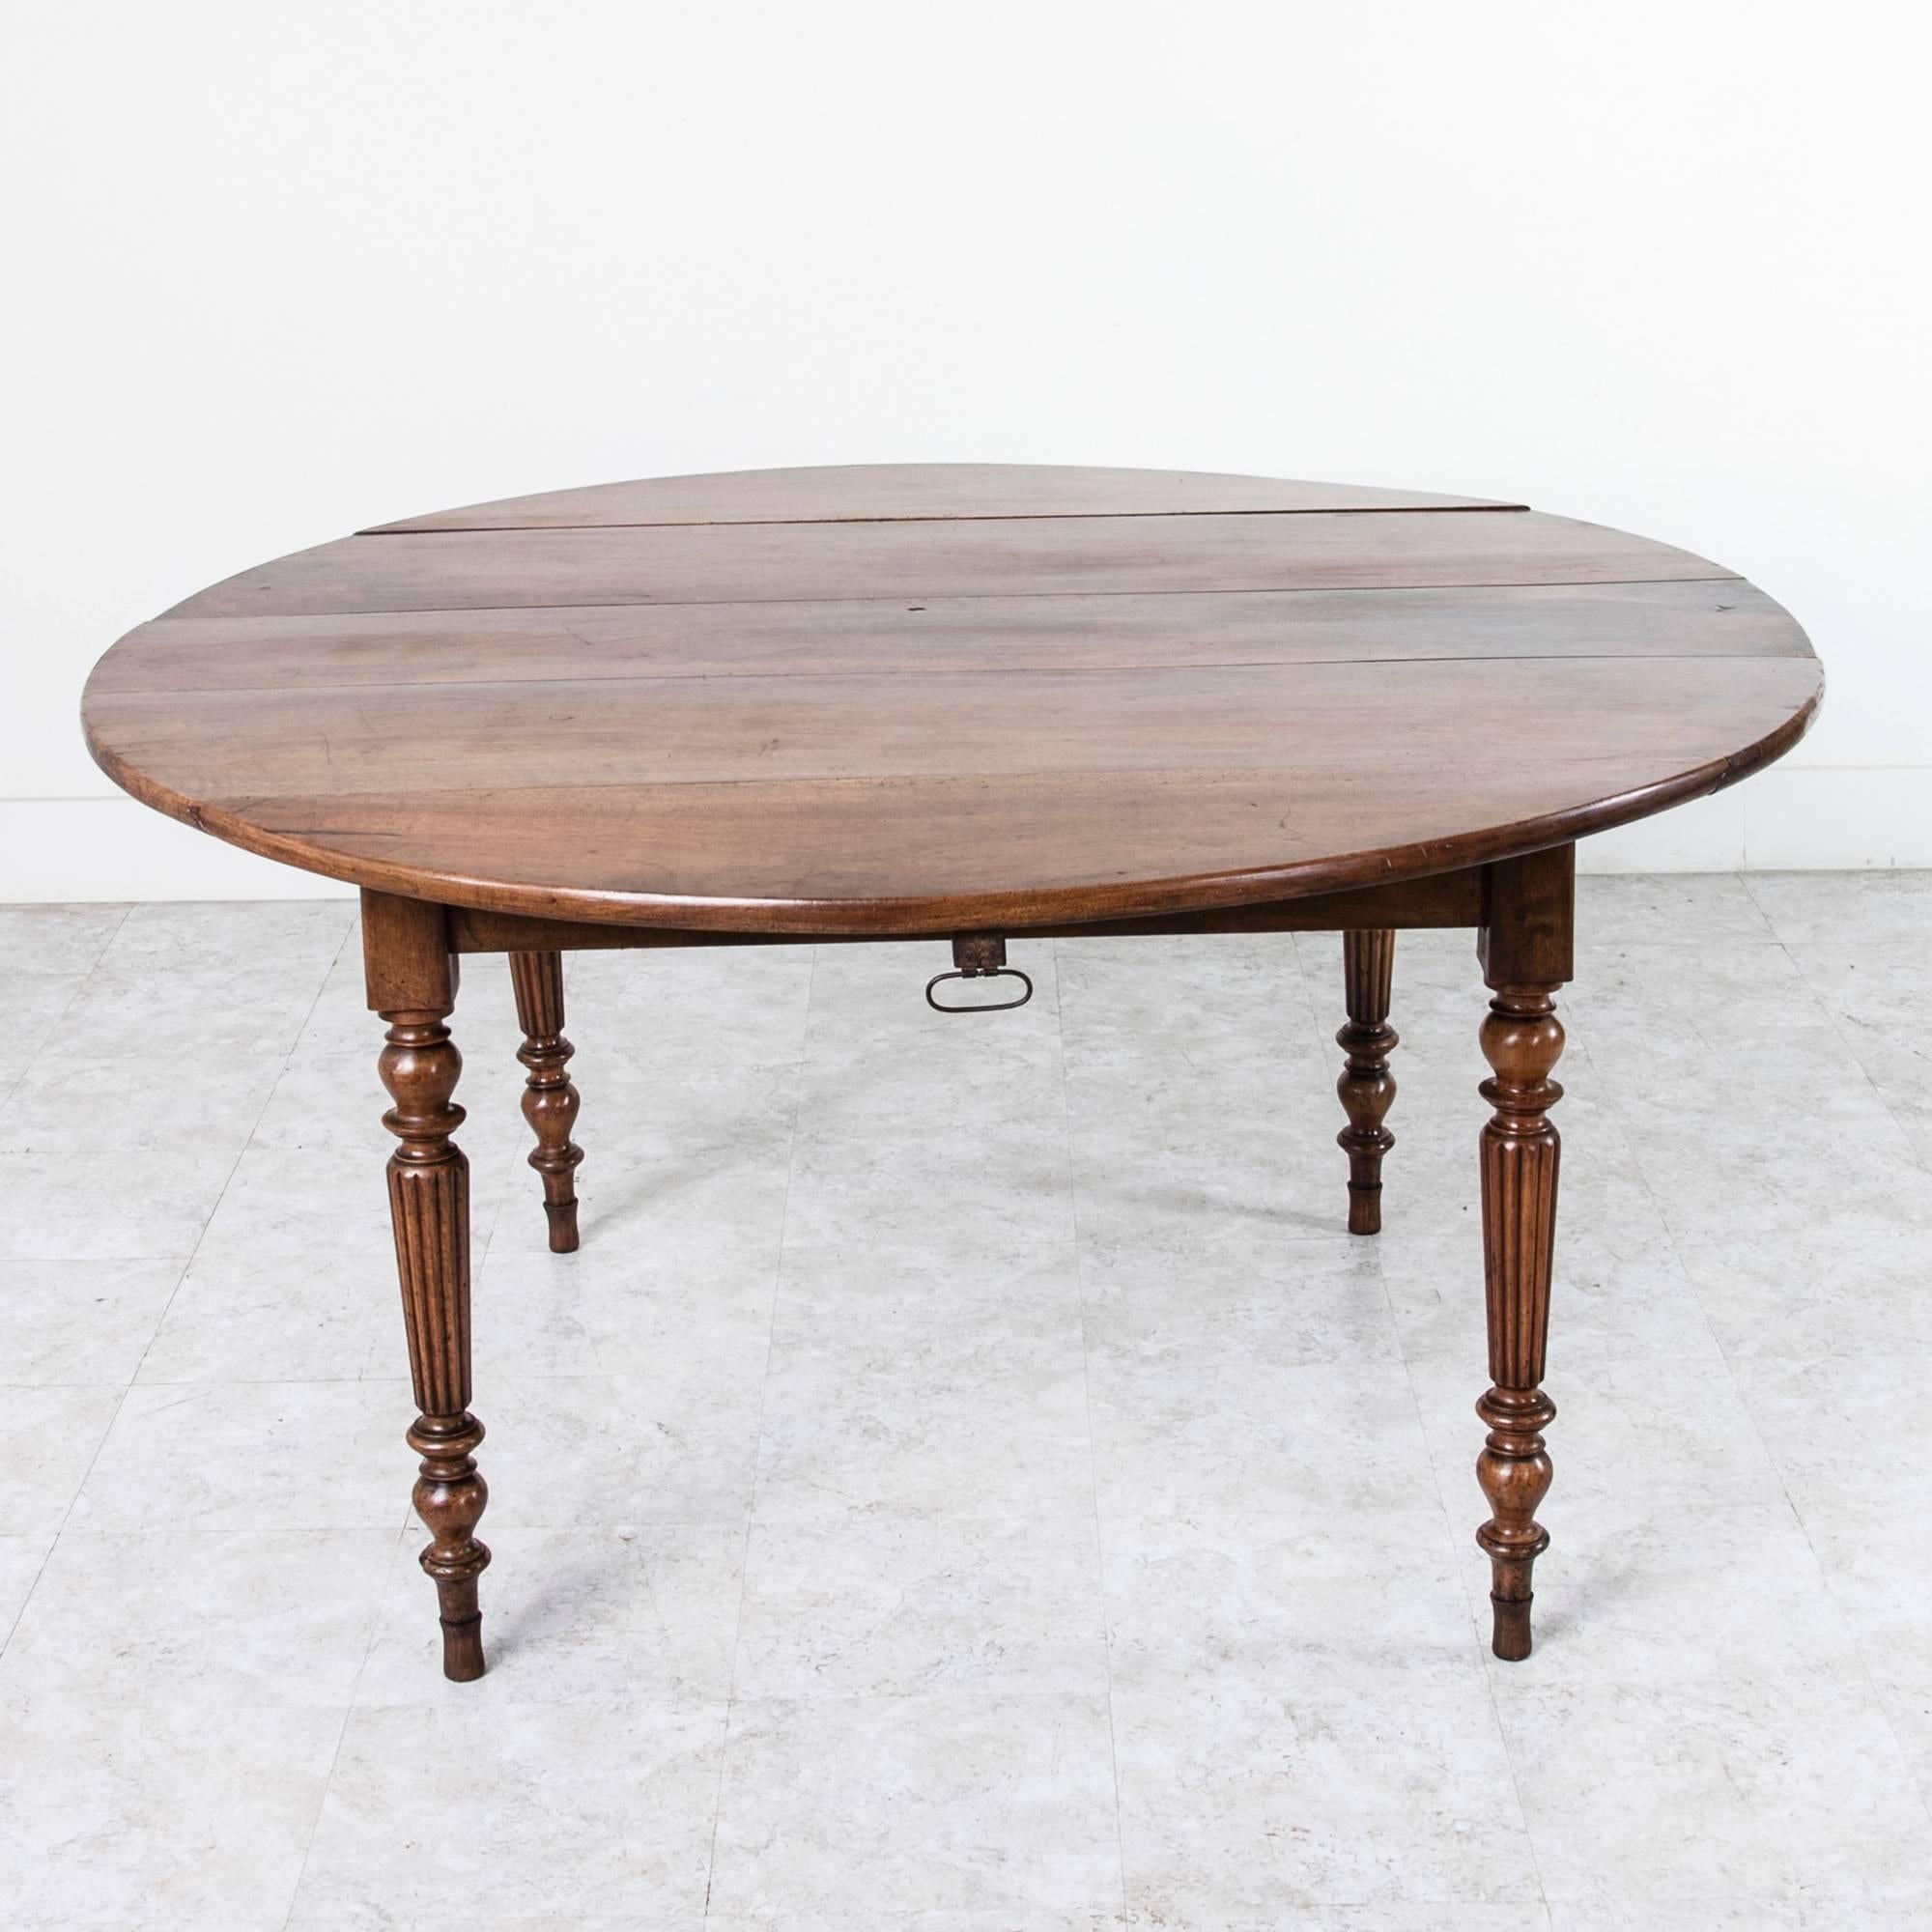 French Period Louis Philippe Solid Walnut Round Dining Table with Turned Fluted Legs